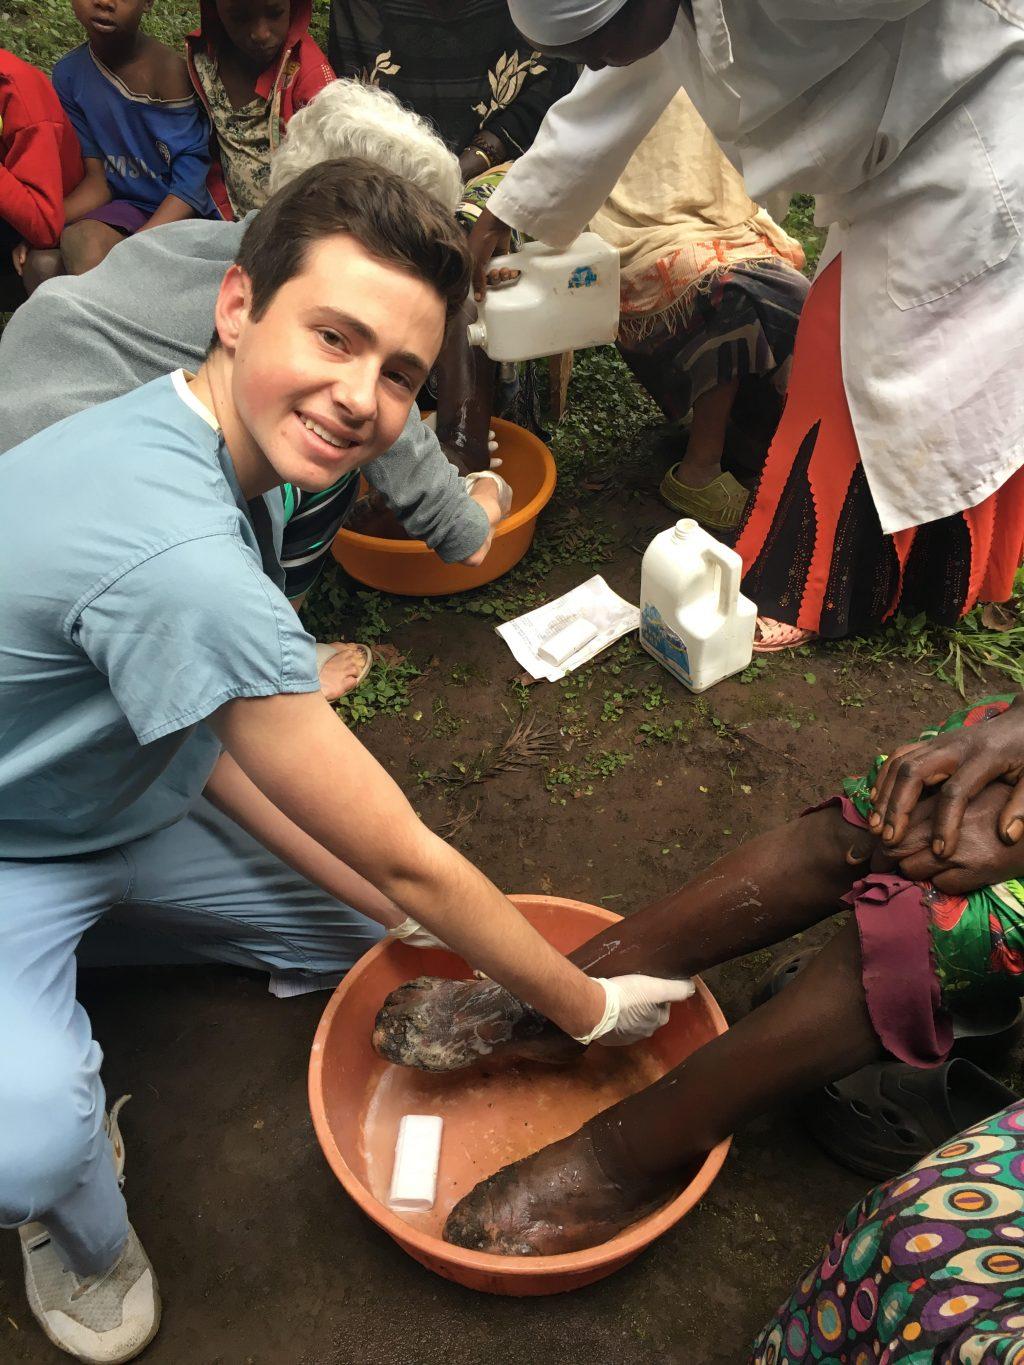 Ishak washes the feet of a child in Ethiopia. He said the experience was very humbling.